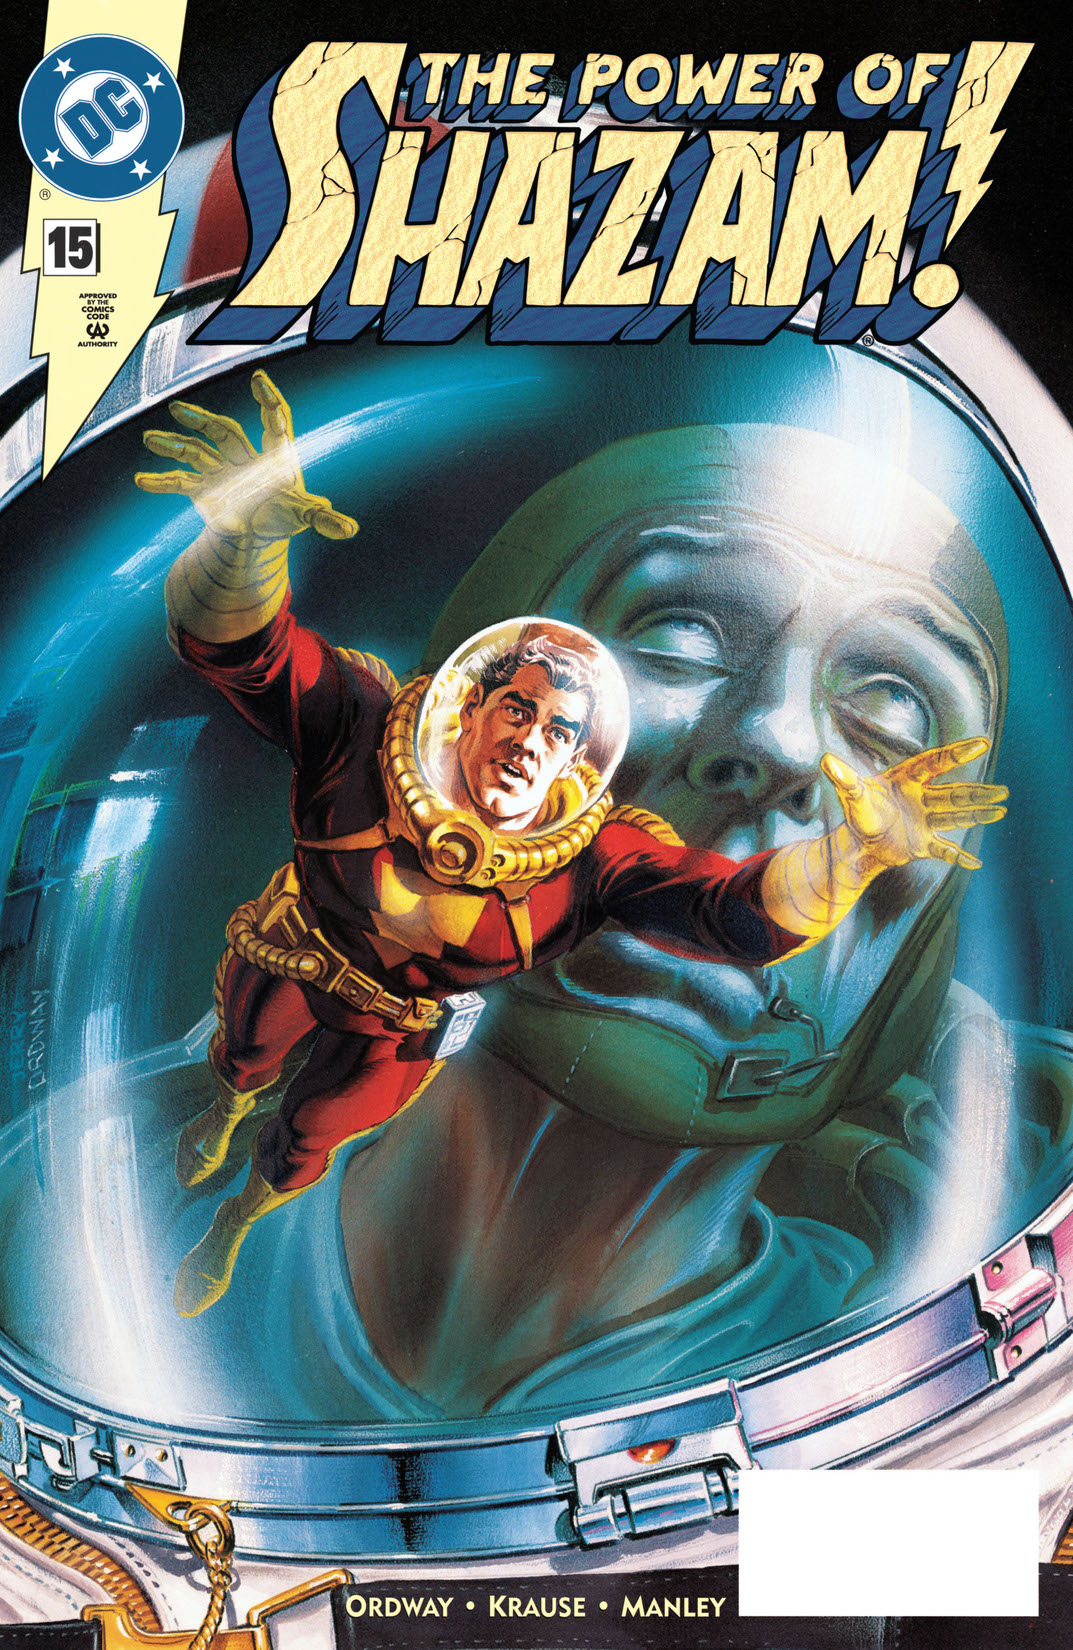 The Power of Shazam! #15 preview images